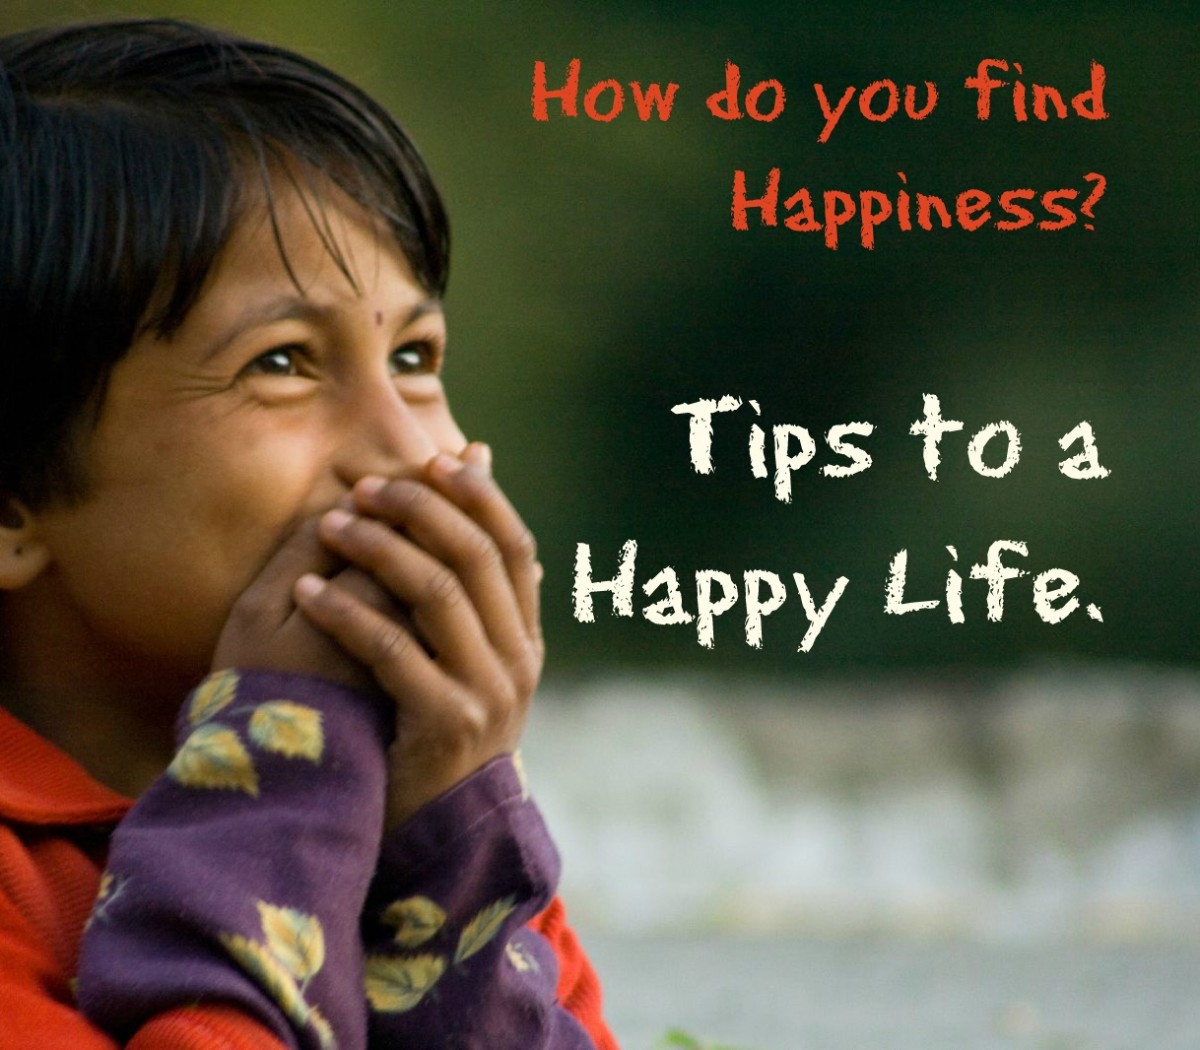 Tips to Live a Happier Life